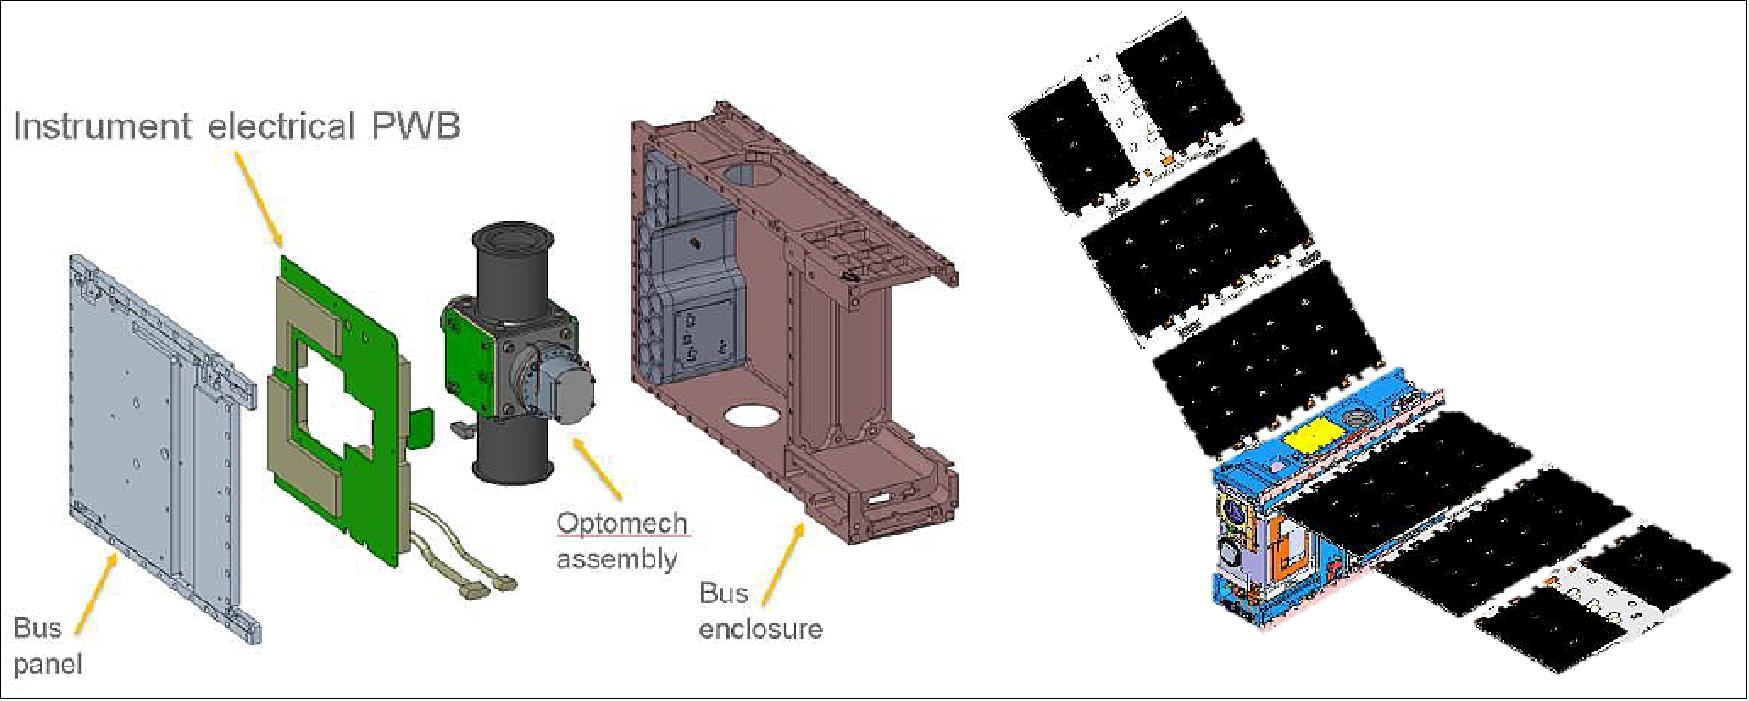 Figure 3: Left frame: An exploded view of the CIRiS instrument and spacecraft. Right frame: The CIRiS spacecraft with solar arrays deployed (image credit: Ball Aerospace)